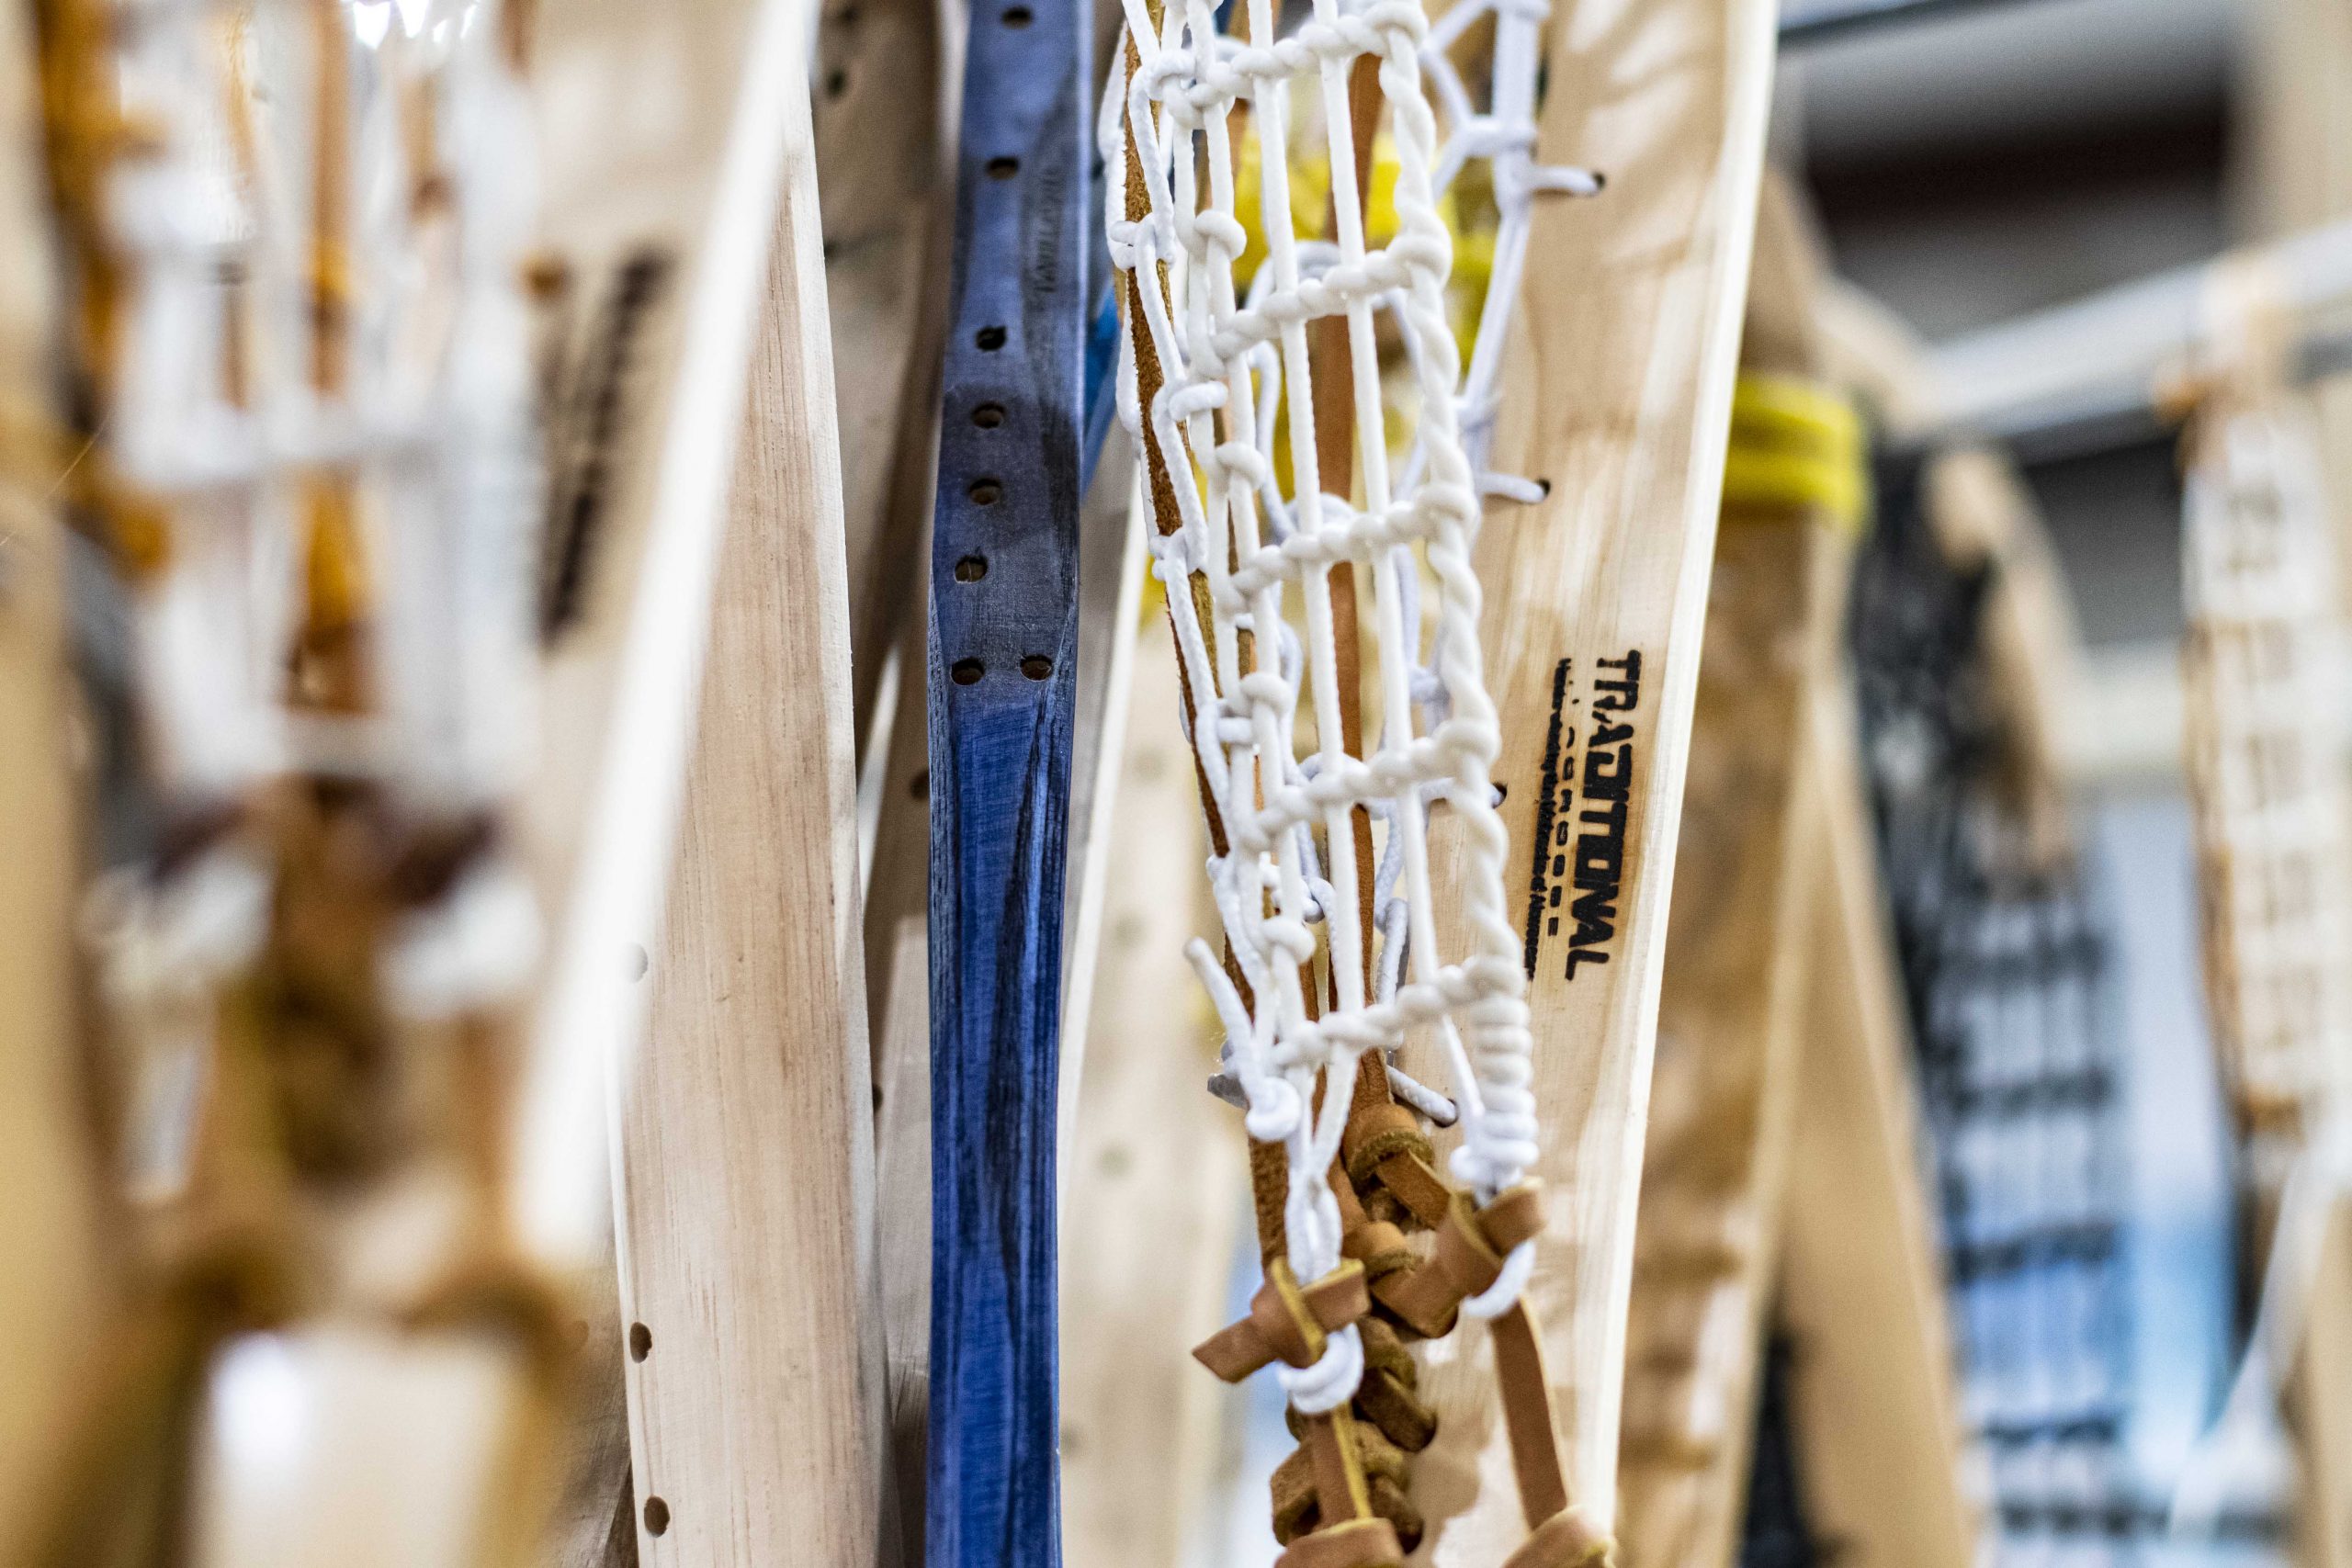 Traditional Lacrosse is a Native American owned and operated, wooden lacrosse stick manufacturer based in the Akwesasne Mohawk Nation. Among the nine different sizes of wooden lacrosse sticks that Traditional Lacrosse manufactures they also specialize in custom trophies, awards, ornaments and custom engravings.  
Traditional Lacrosse also offers in-person and virtual factory tours.